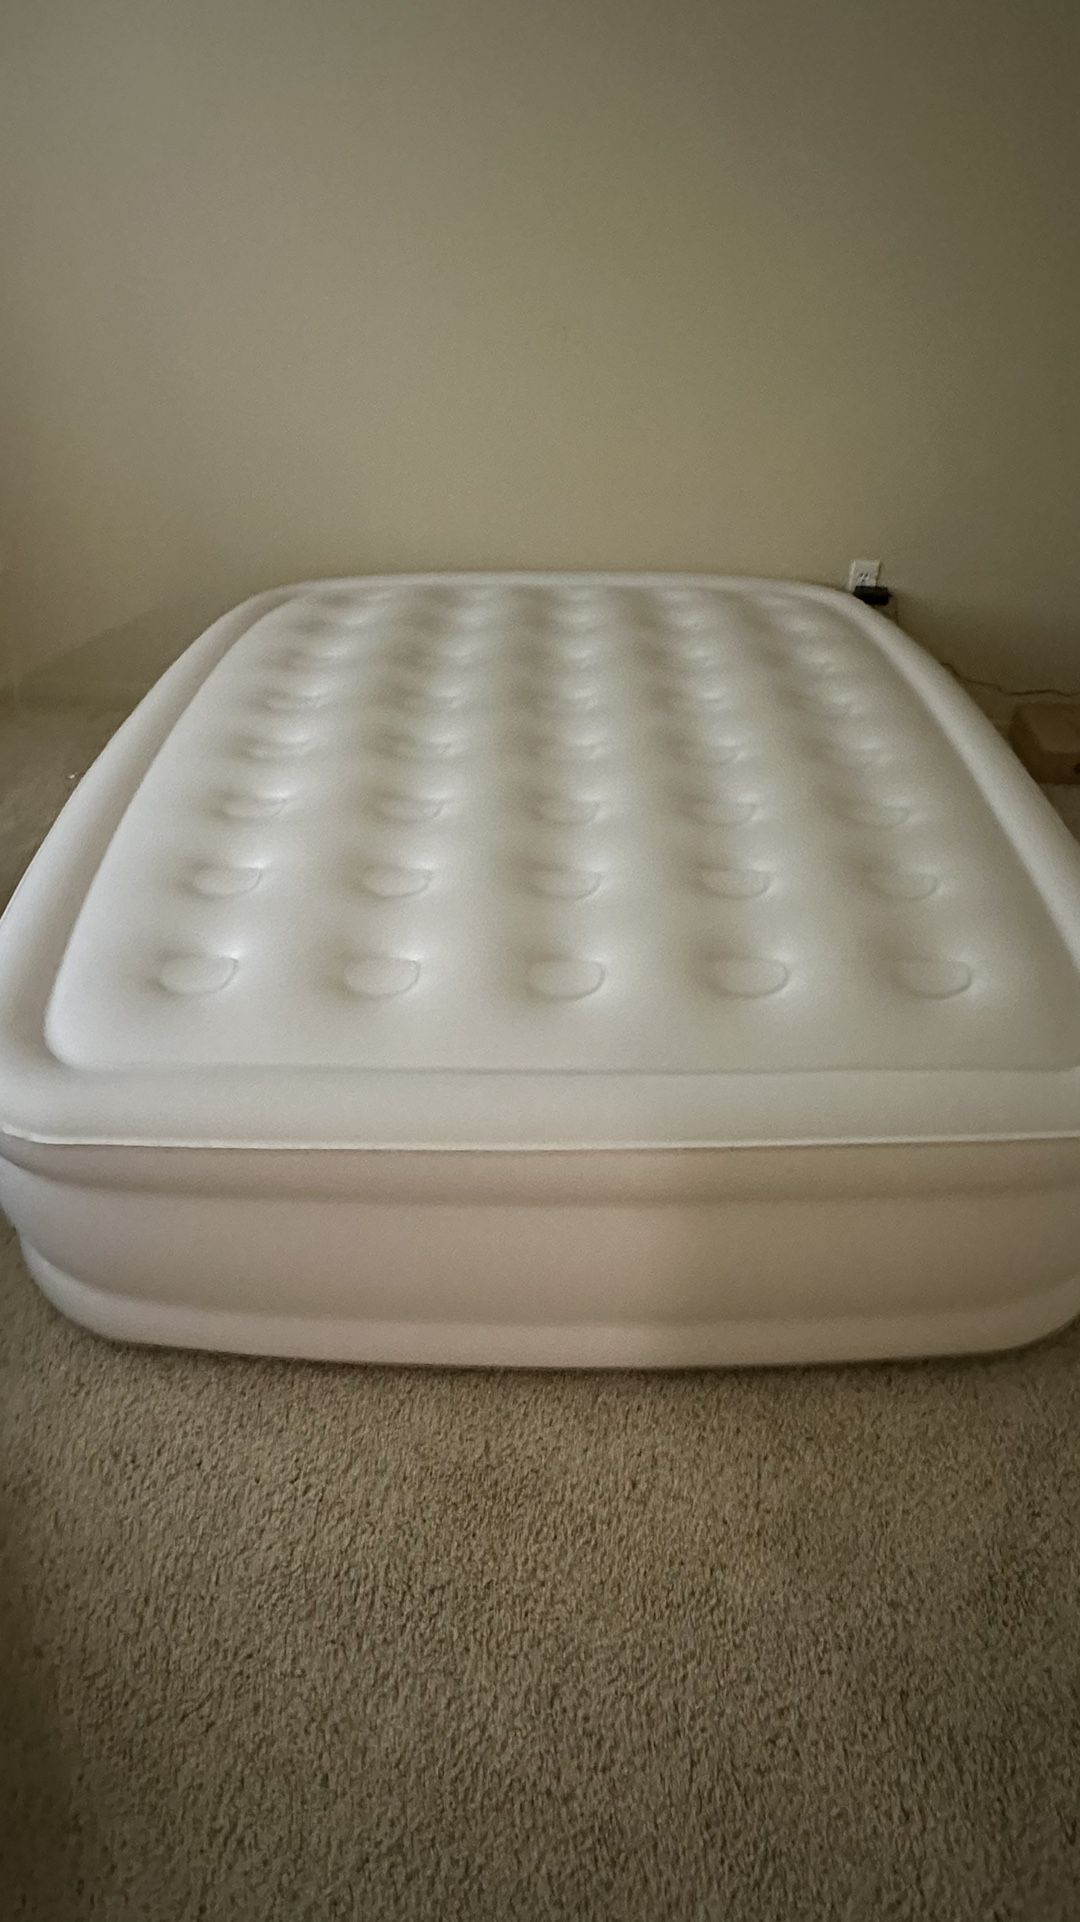 Airbed For Sale! 